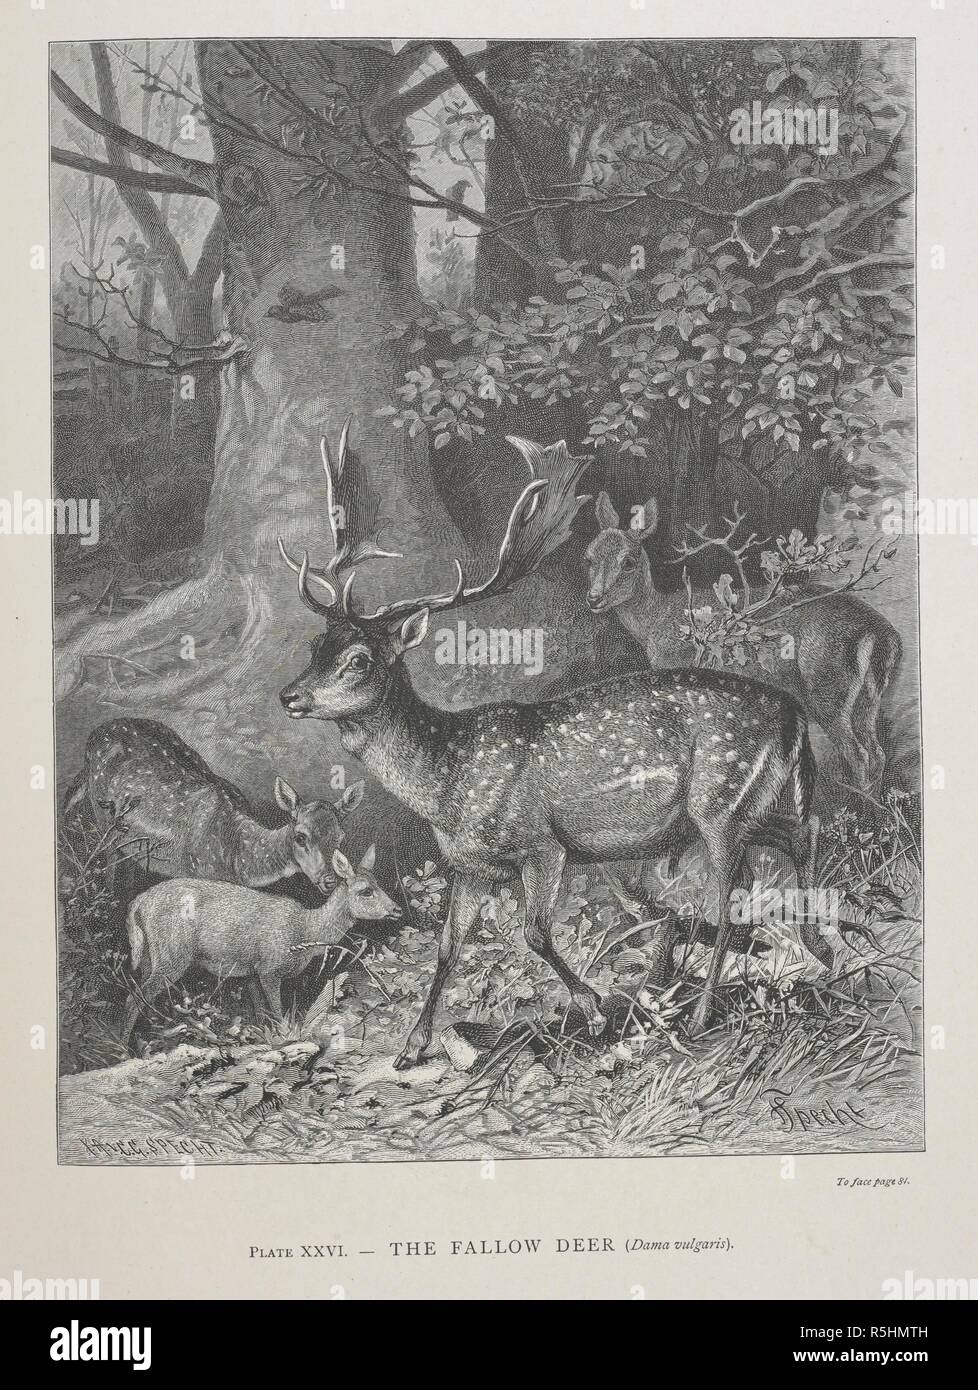 The Fallow Deer. The Geographical Distribution of Animals, with a study of the relations of living and extinct faunas as elucidating the past changes of the earth's surface. ... . London, 1876. Source: 07209.dd.1 plate XXXVI. Author: WALLACE, ALFRED RUSSEL. Stock Photo